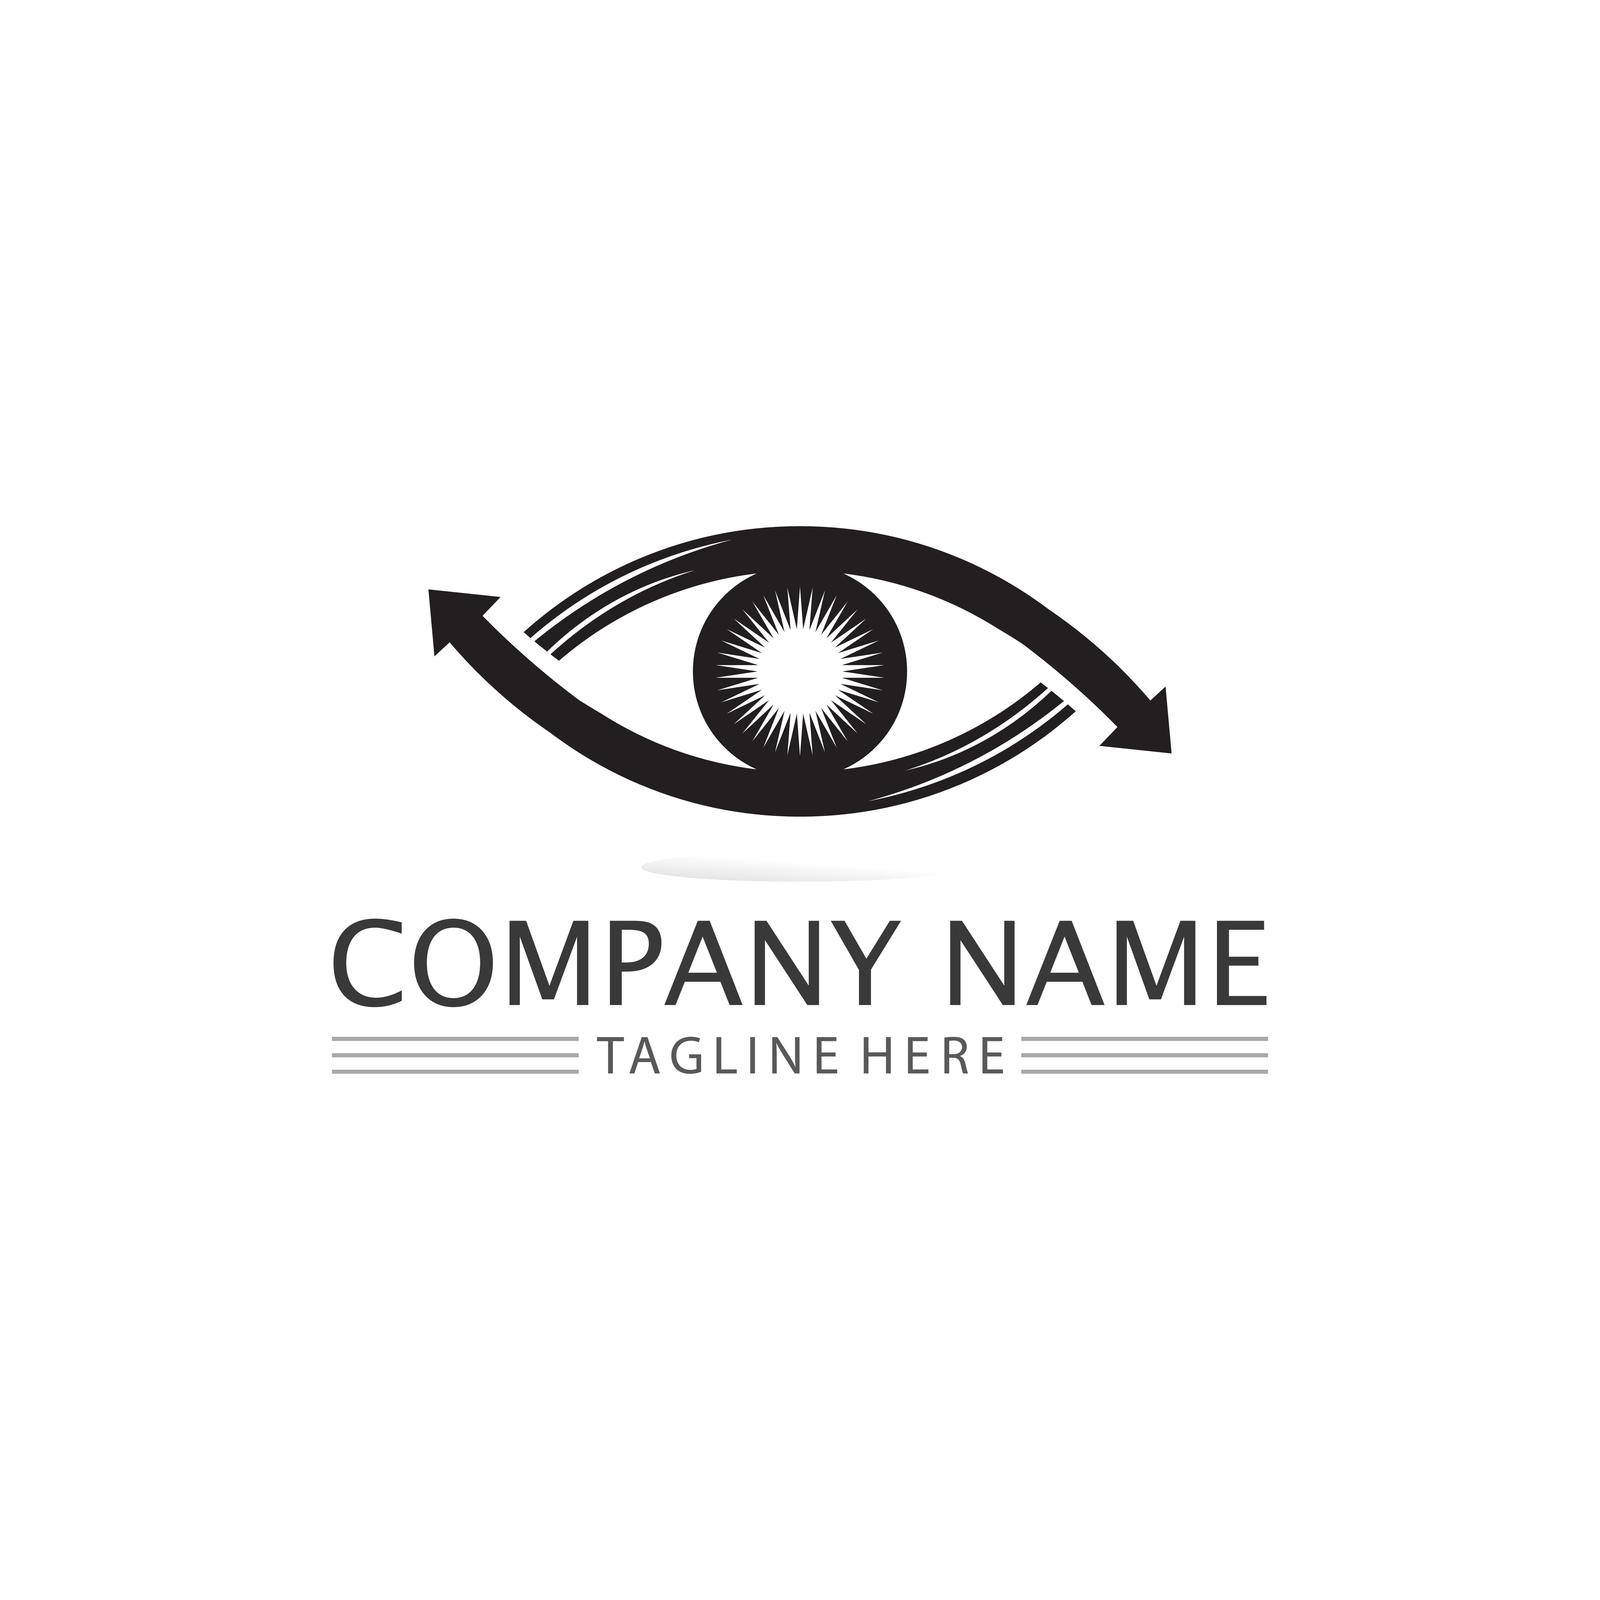 eye icon and vision design logo isolated sign symbol vector Intuition and spirituality by Anggasaputro